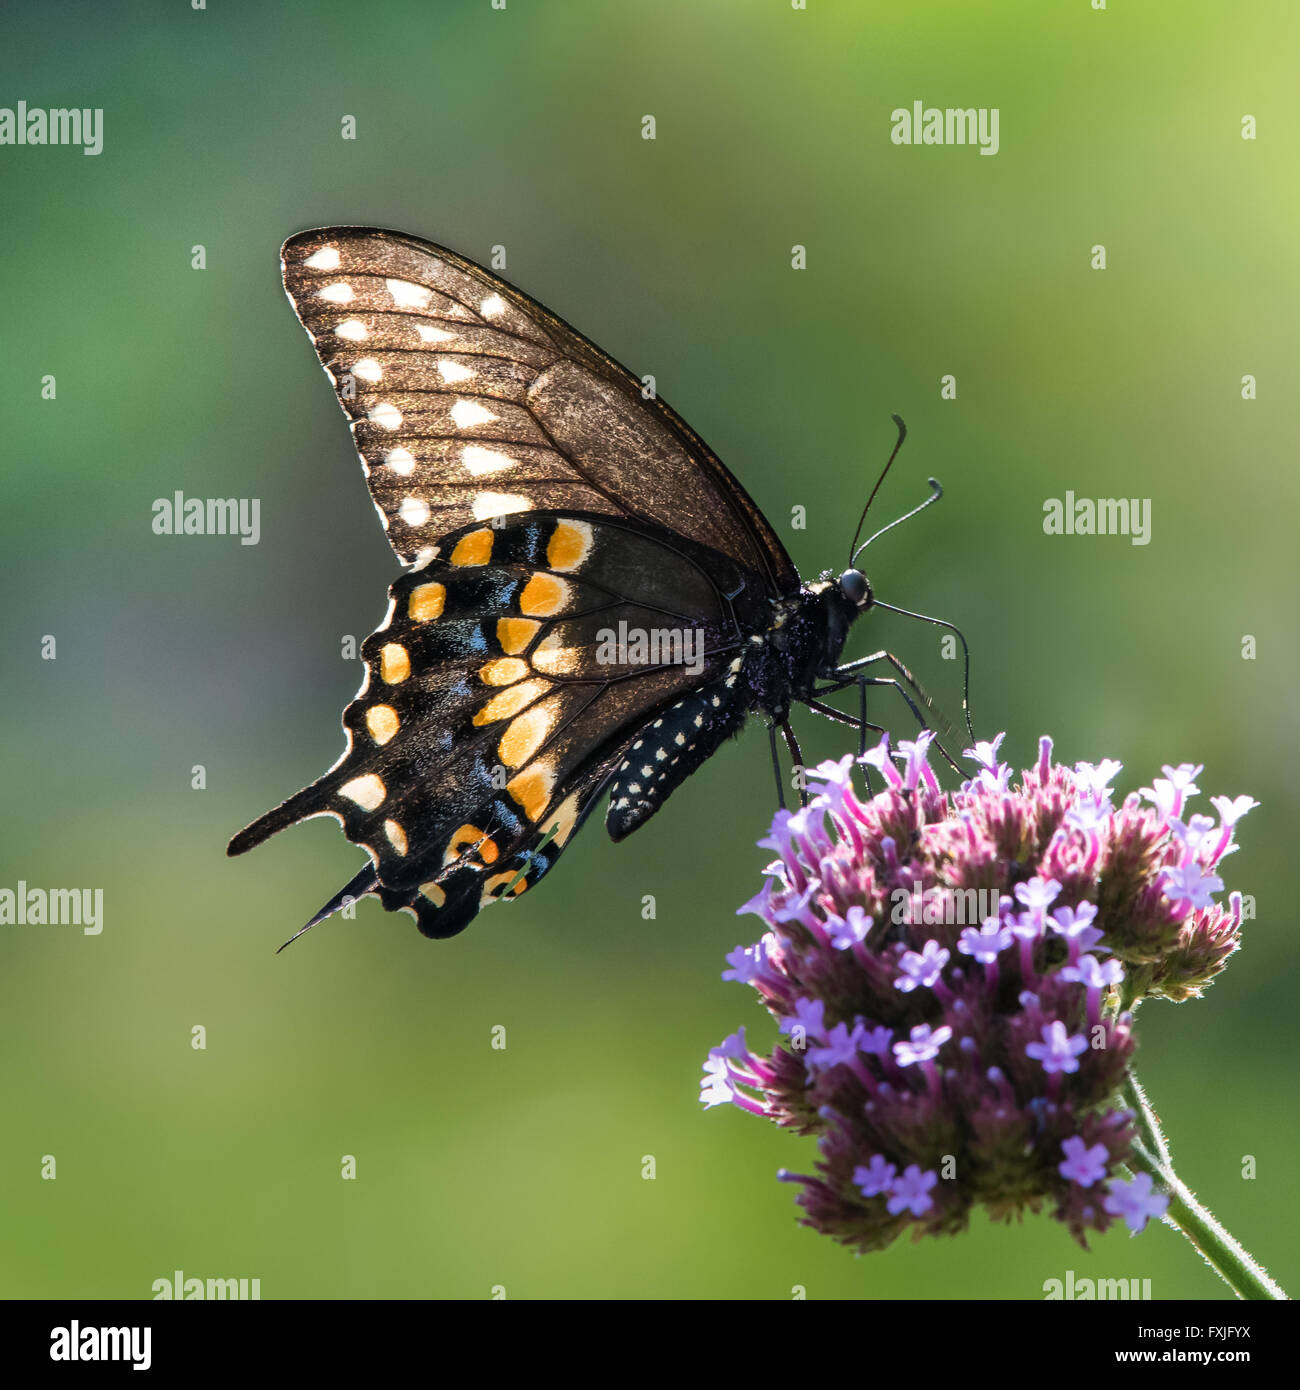 Profile Portrait of a Black Swallowtail Perched on a Verbena Flower Stock Photo